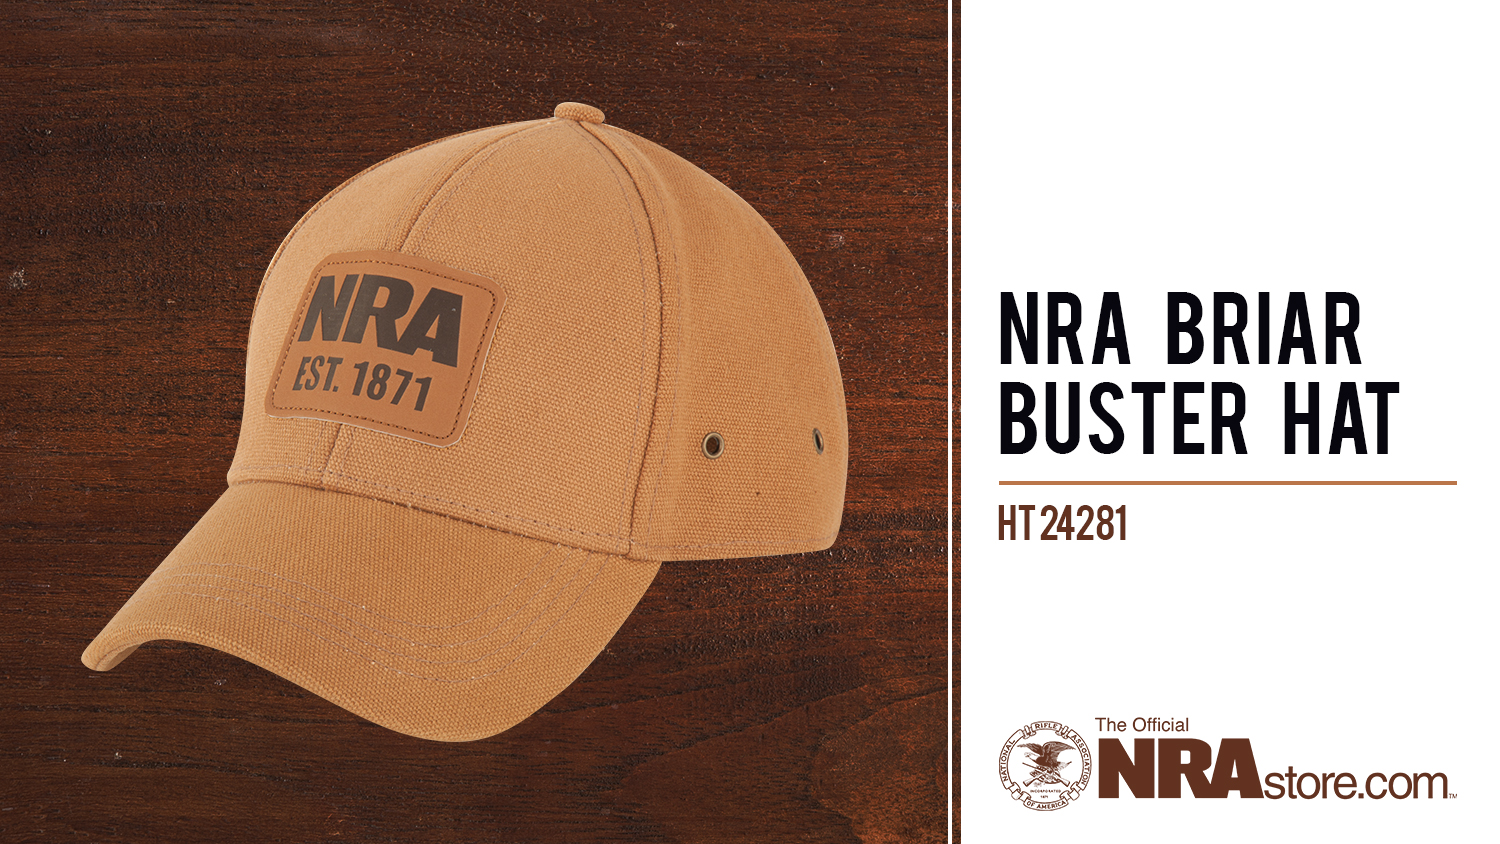 NRAstore Product Highlight: NRA Briar Buster Hat